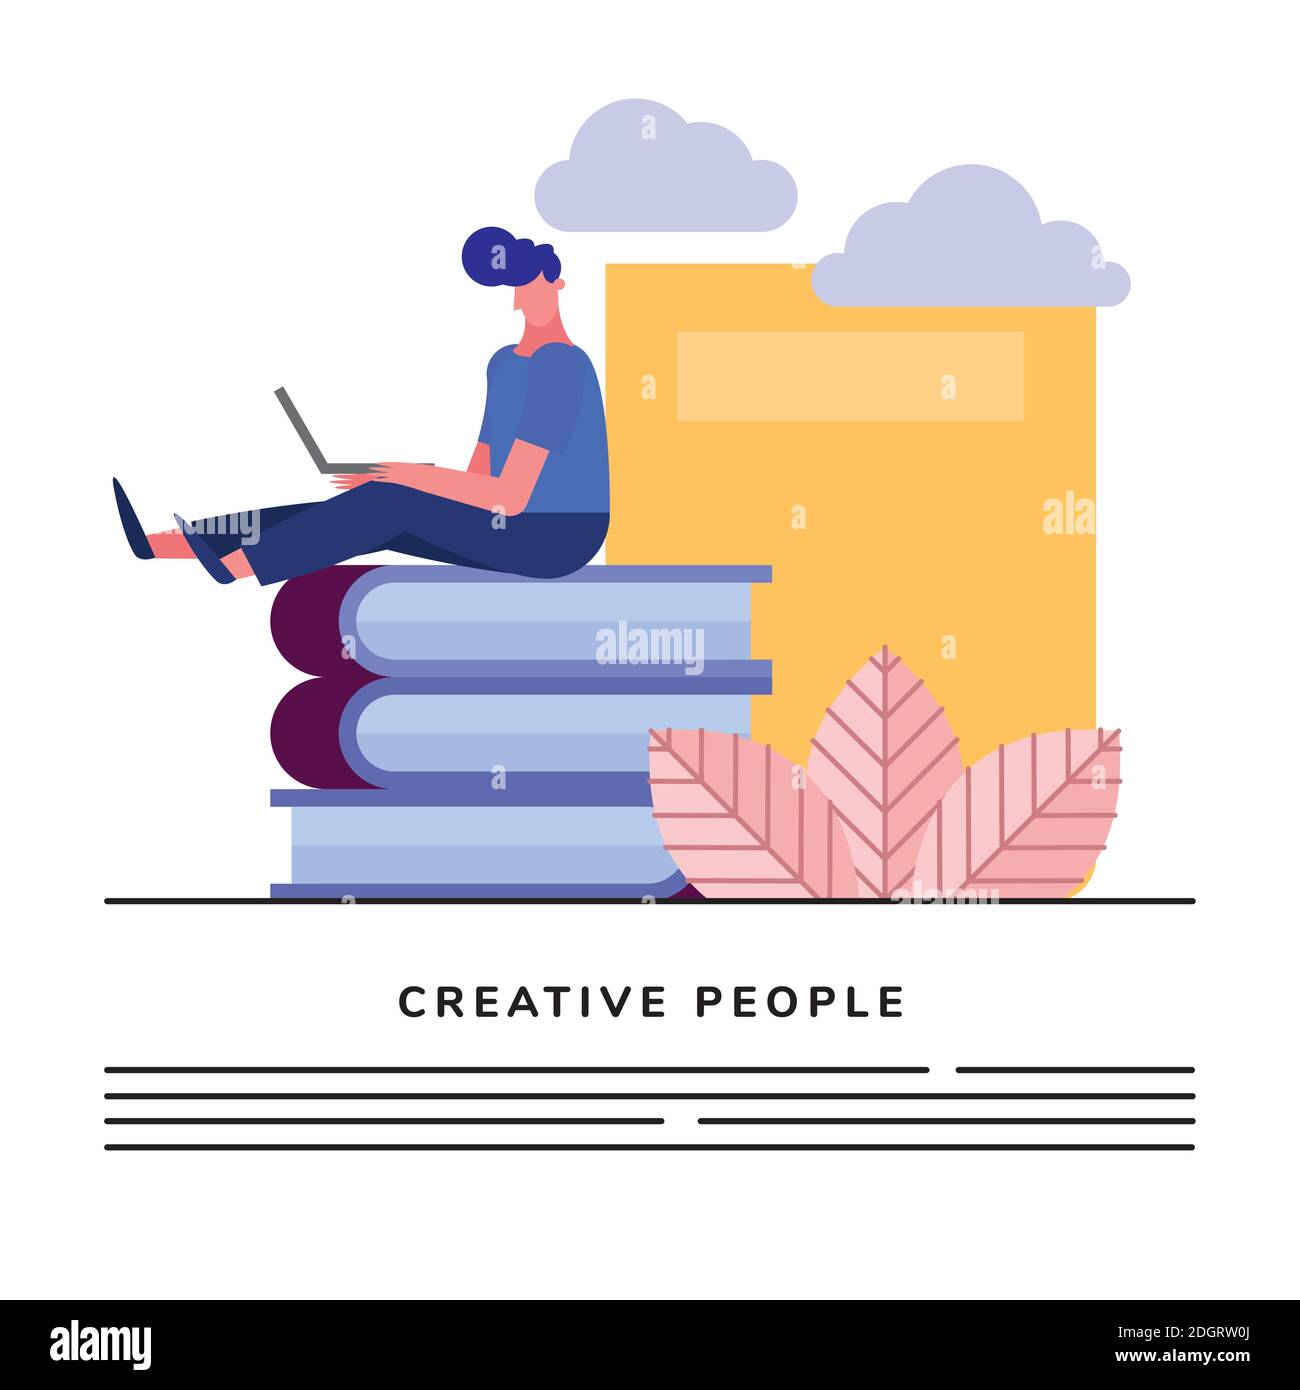 young man using laptop seated in books creative character vector illustration design Stock Vector